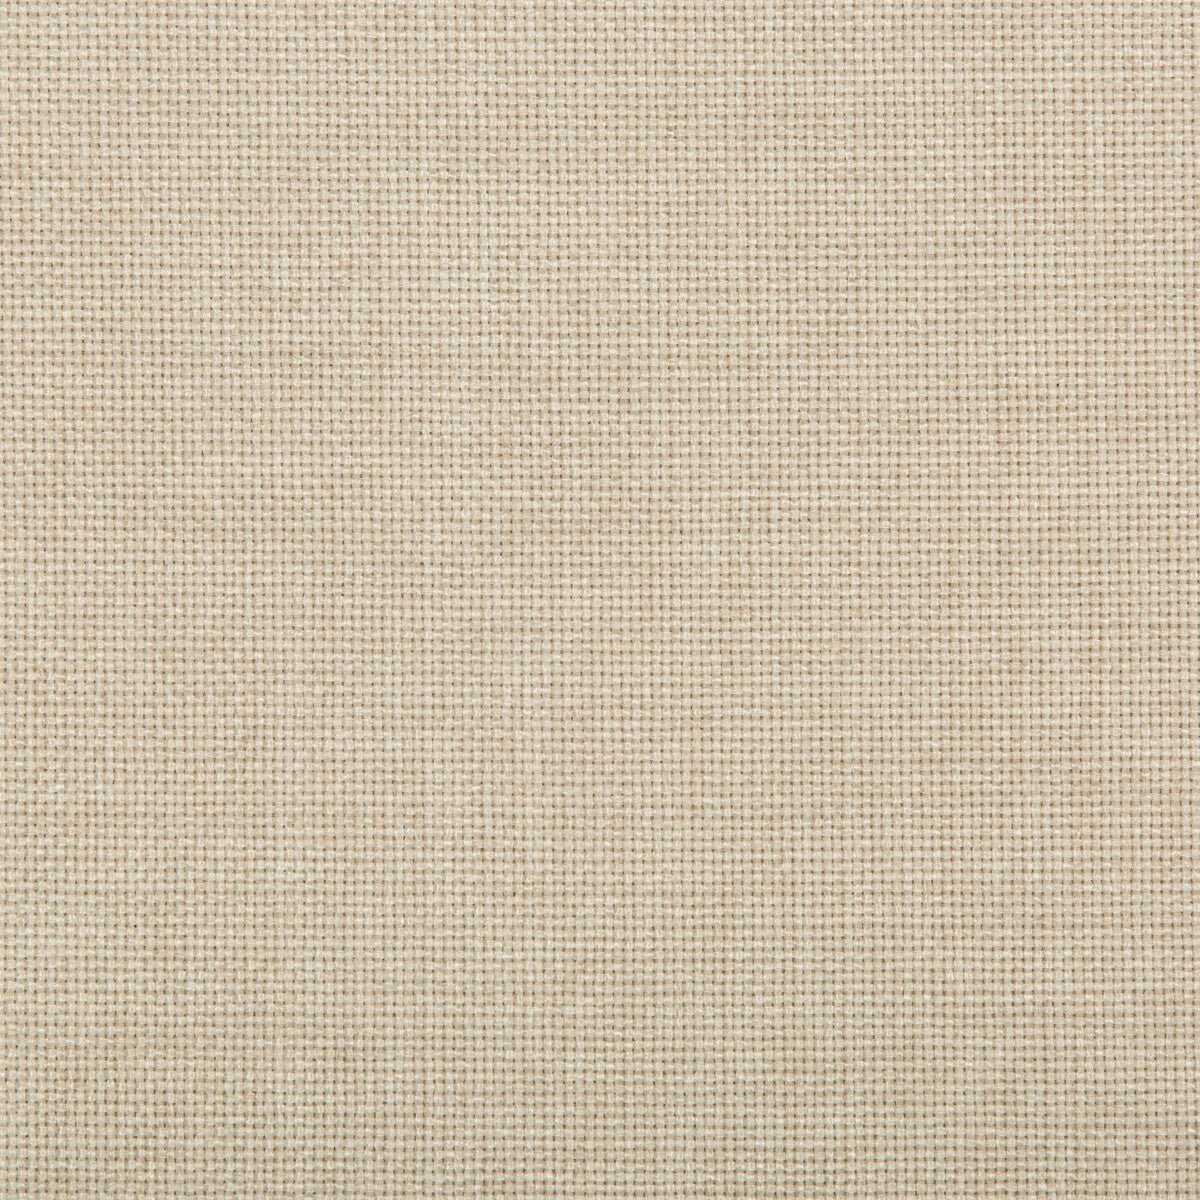 Kravet Contract fabric in 4637-111 color - pattern 4637.111.0 - by Kravet Contract